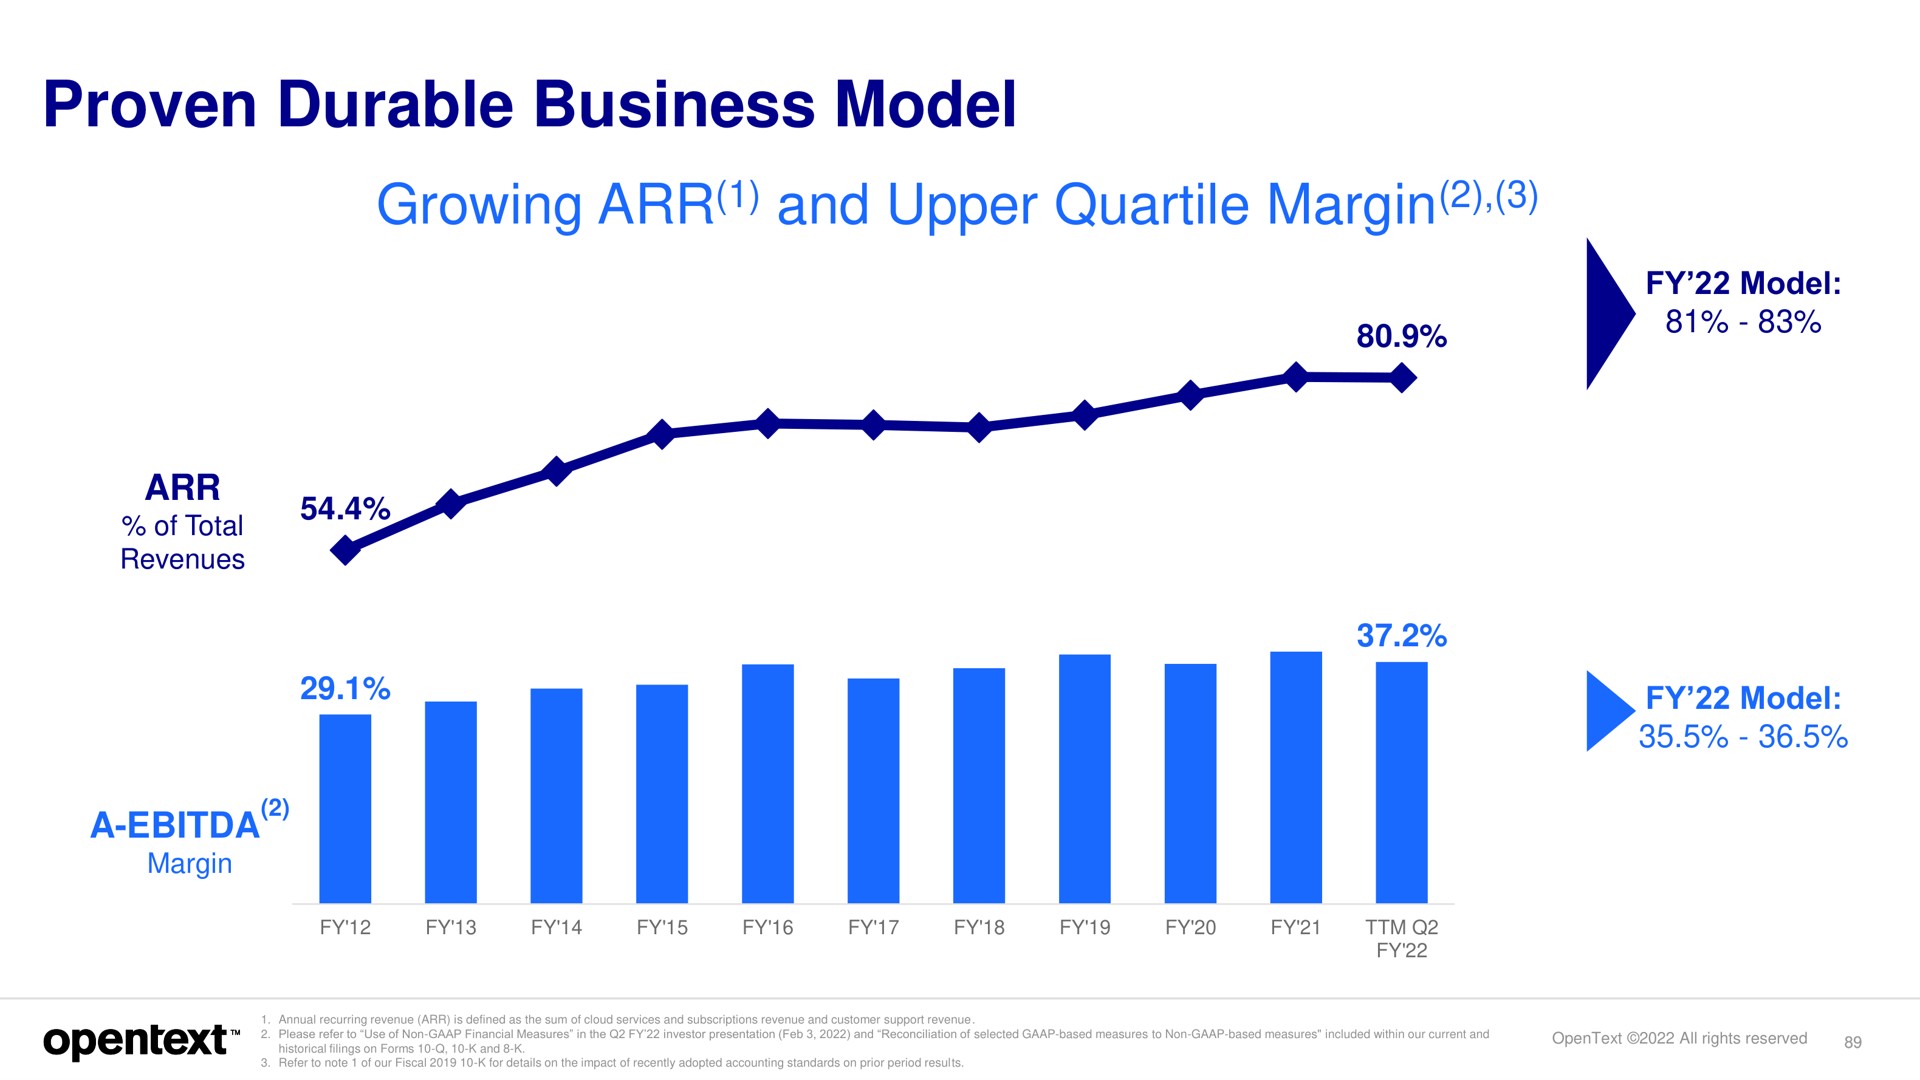 proven durable business model growing and upper quartile margin | OpenText